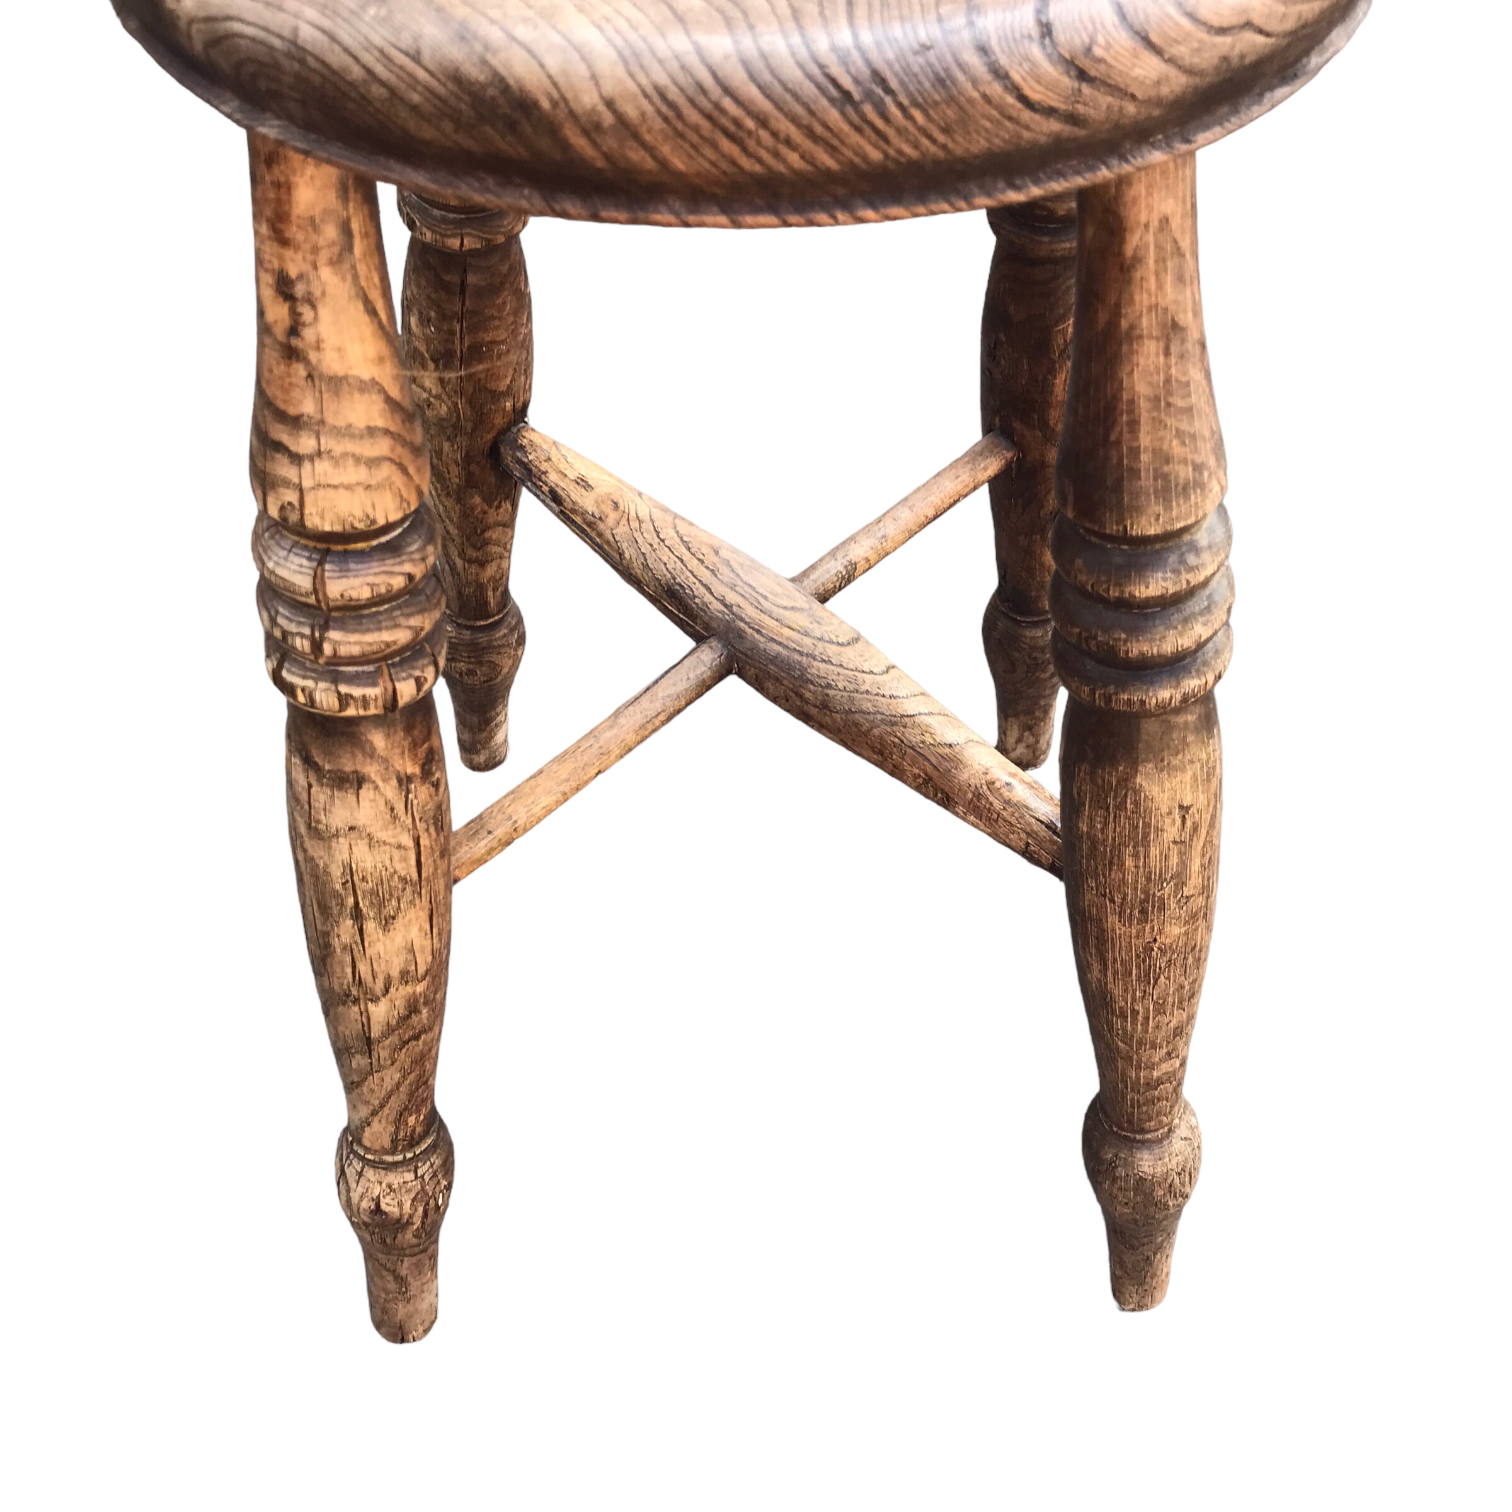 ANTIQUE VICTORIAN COUNTRY ELM STOOL